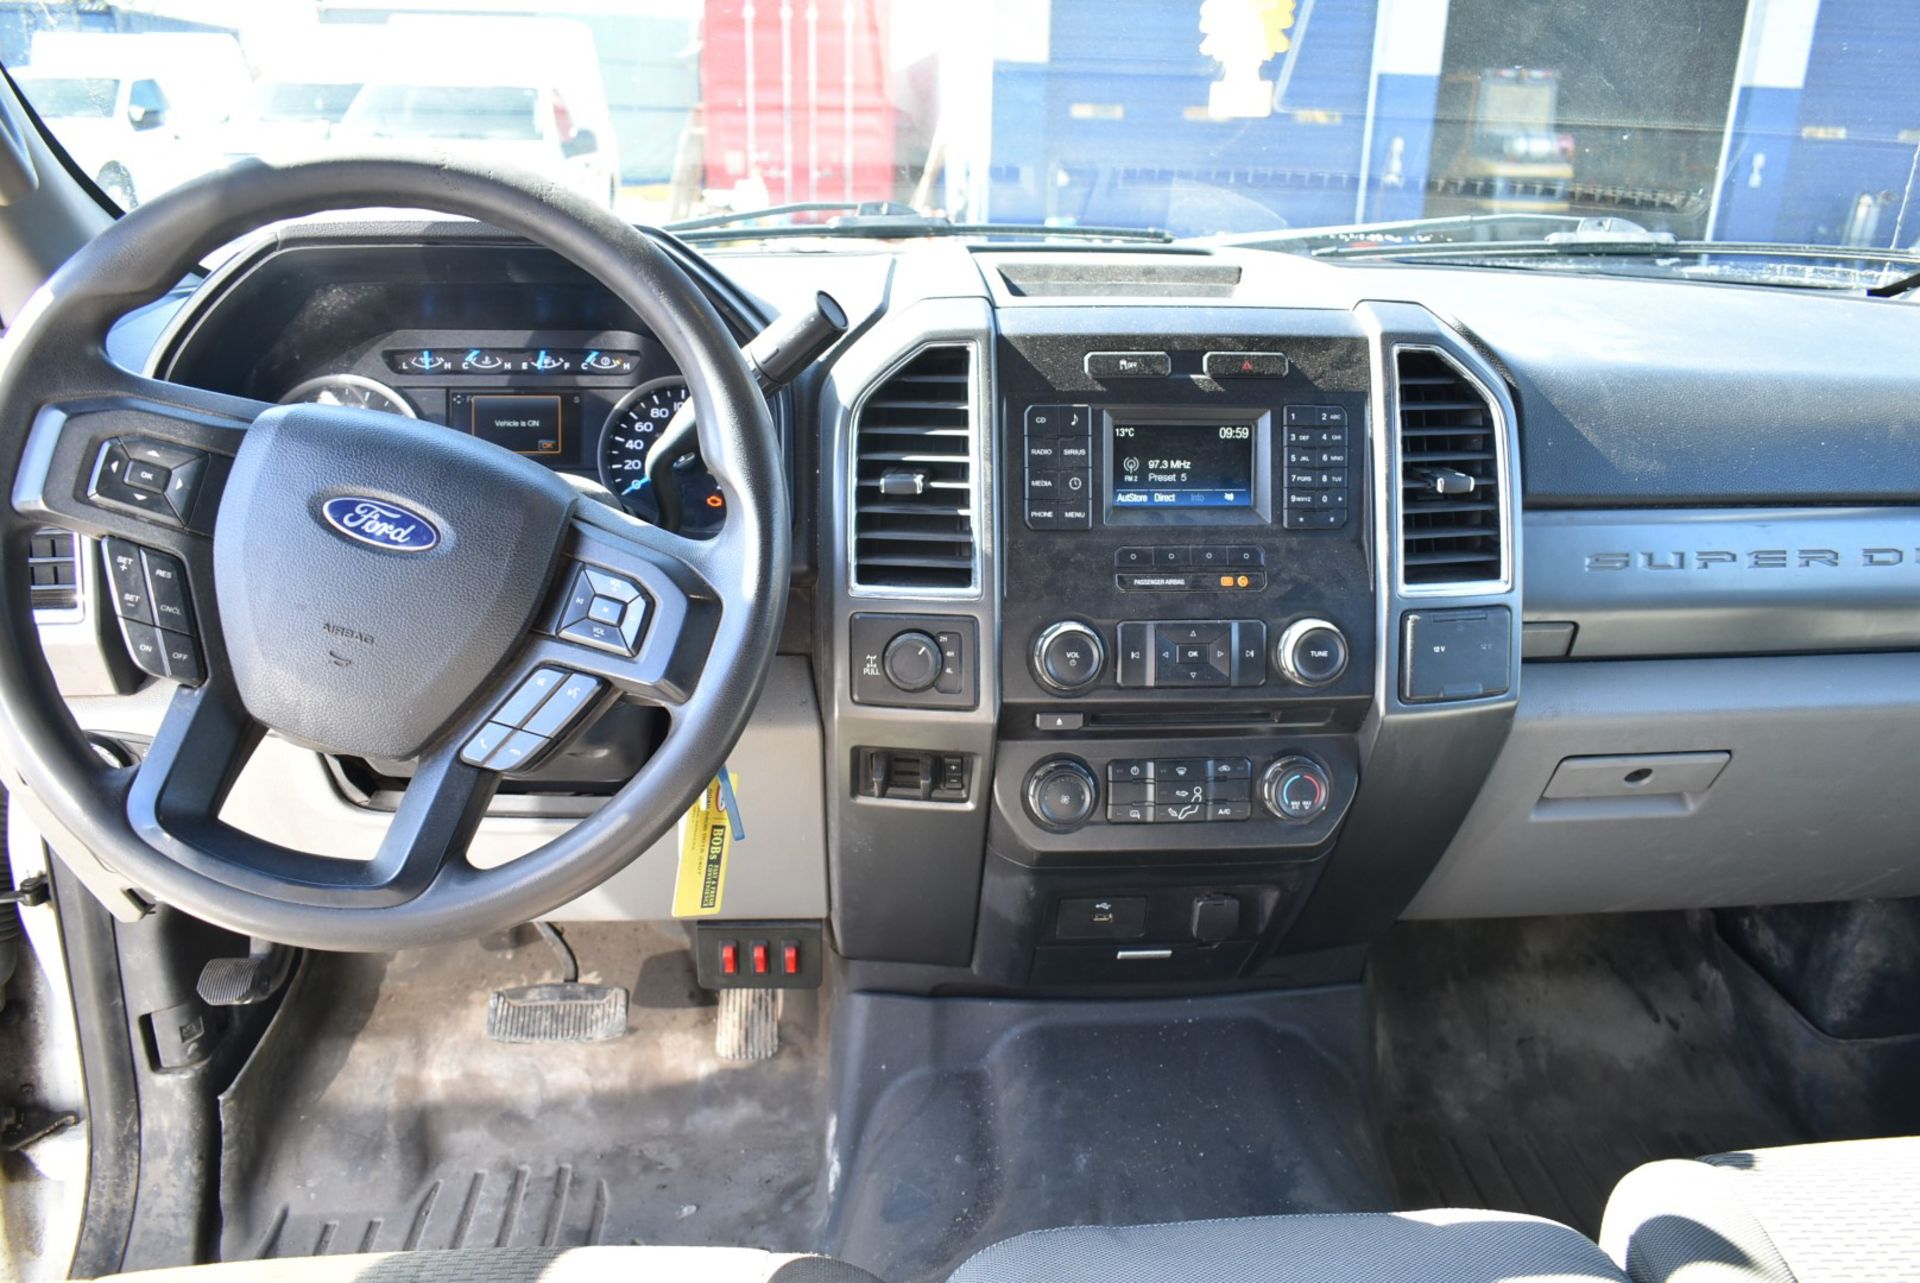 FORD (2017) F250 XLT SUPER DUTY CREW CAB PICKUP TRUCK WITH 6.2L 8 CYL. GAS ENGINE, AUTO. - Image 12 of 15